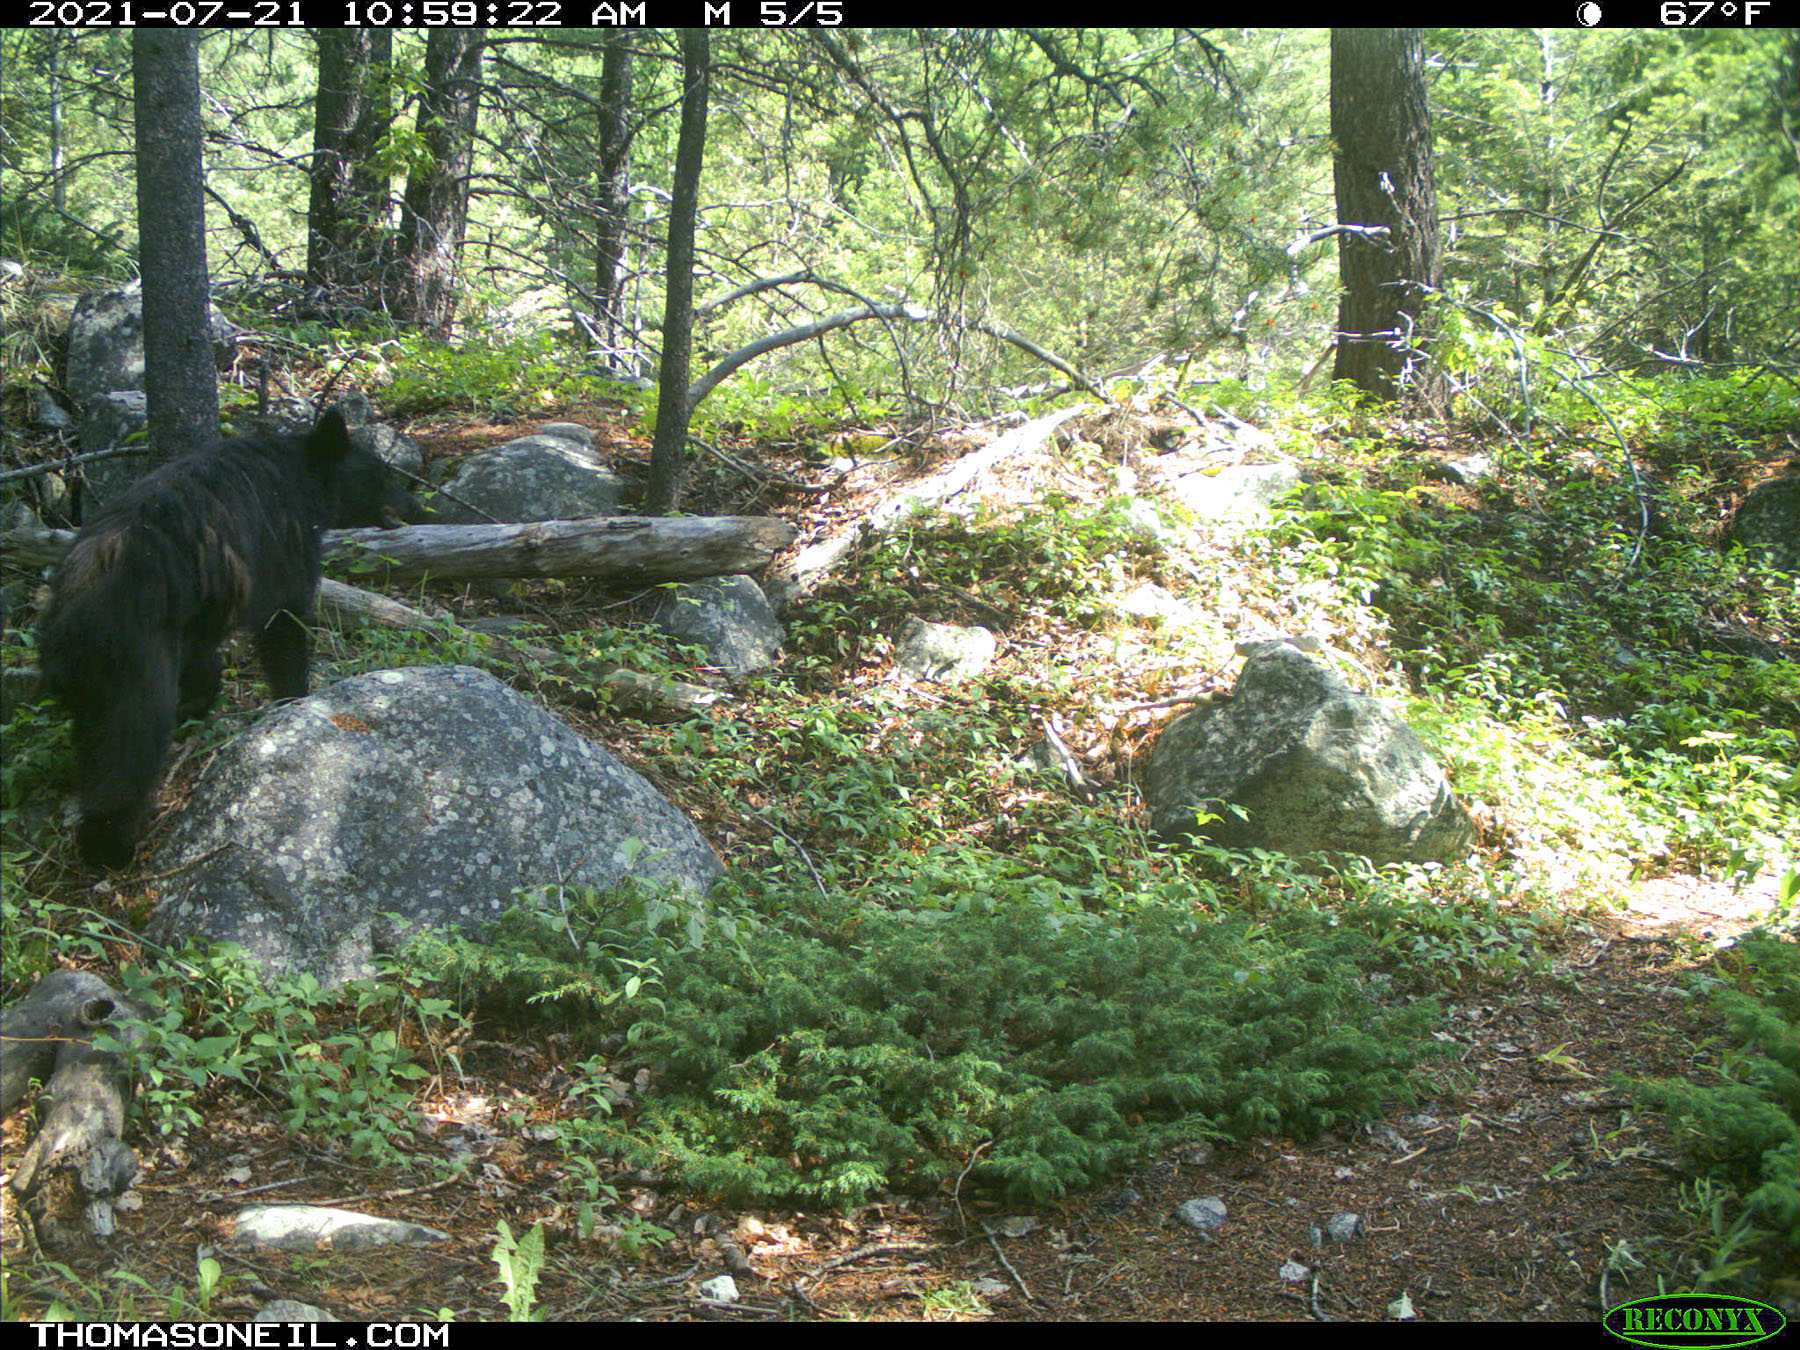 Bear on trailcam near Red Lodge, MT, October 2021.